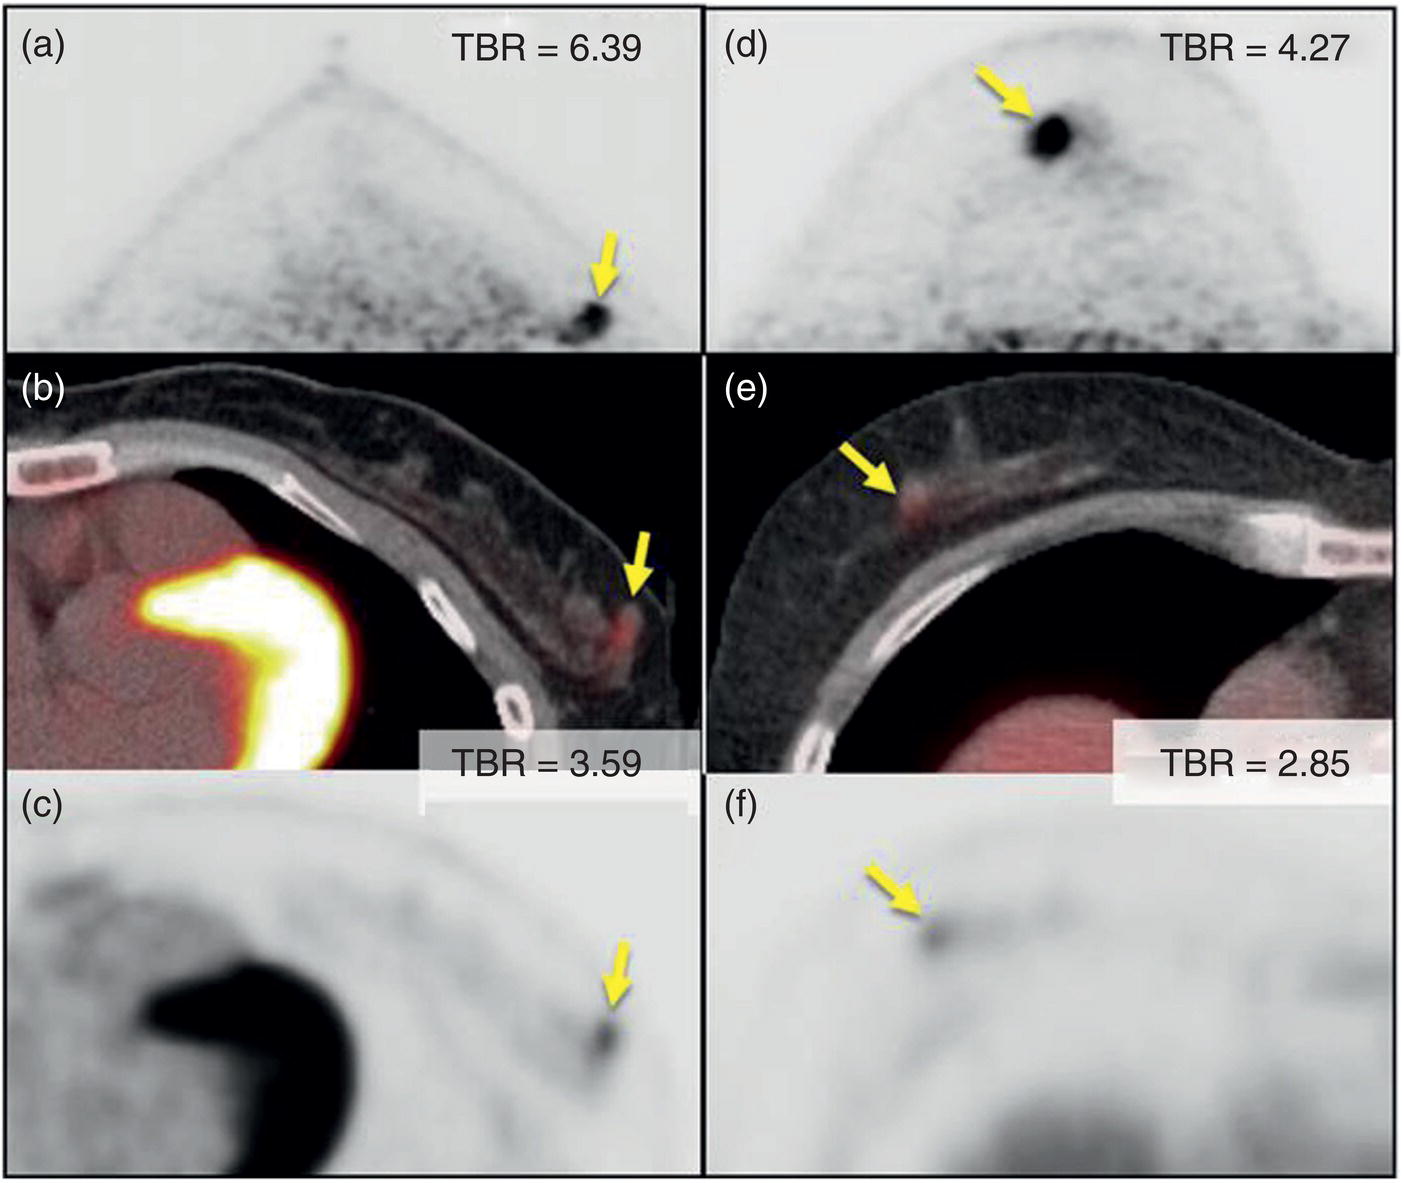 Schematic illustration of peripheral and nonperipheral breast cancer images of dbPET scanned in the prone position and whole-body PET/CT scanned in the supine position.